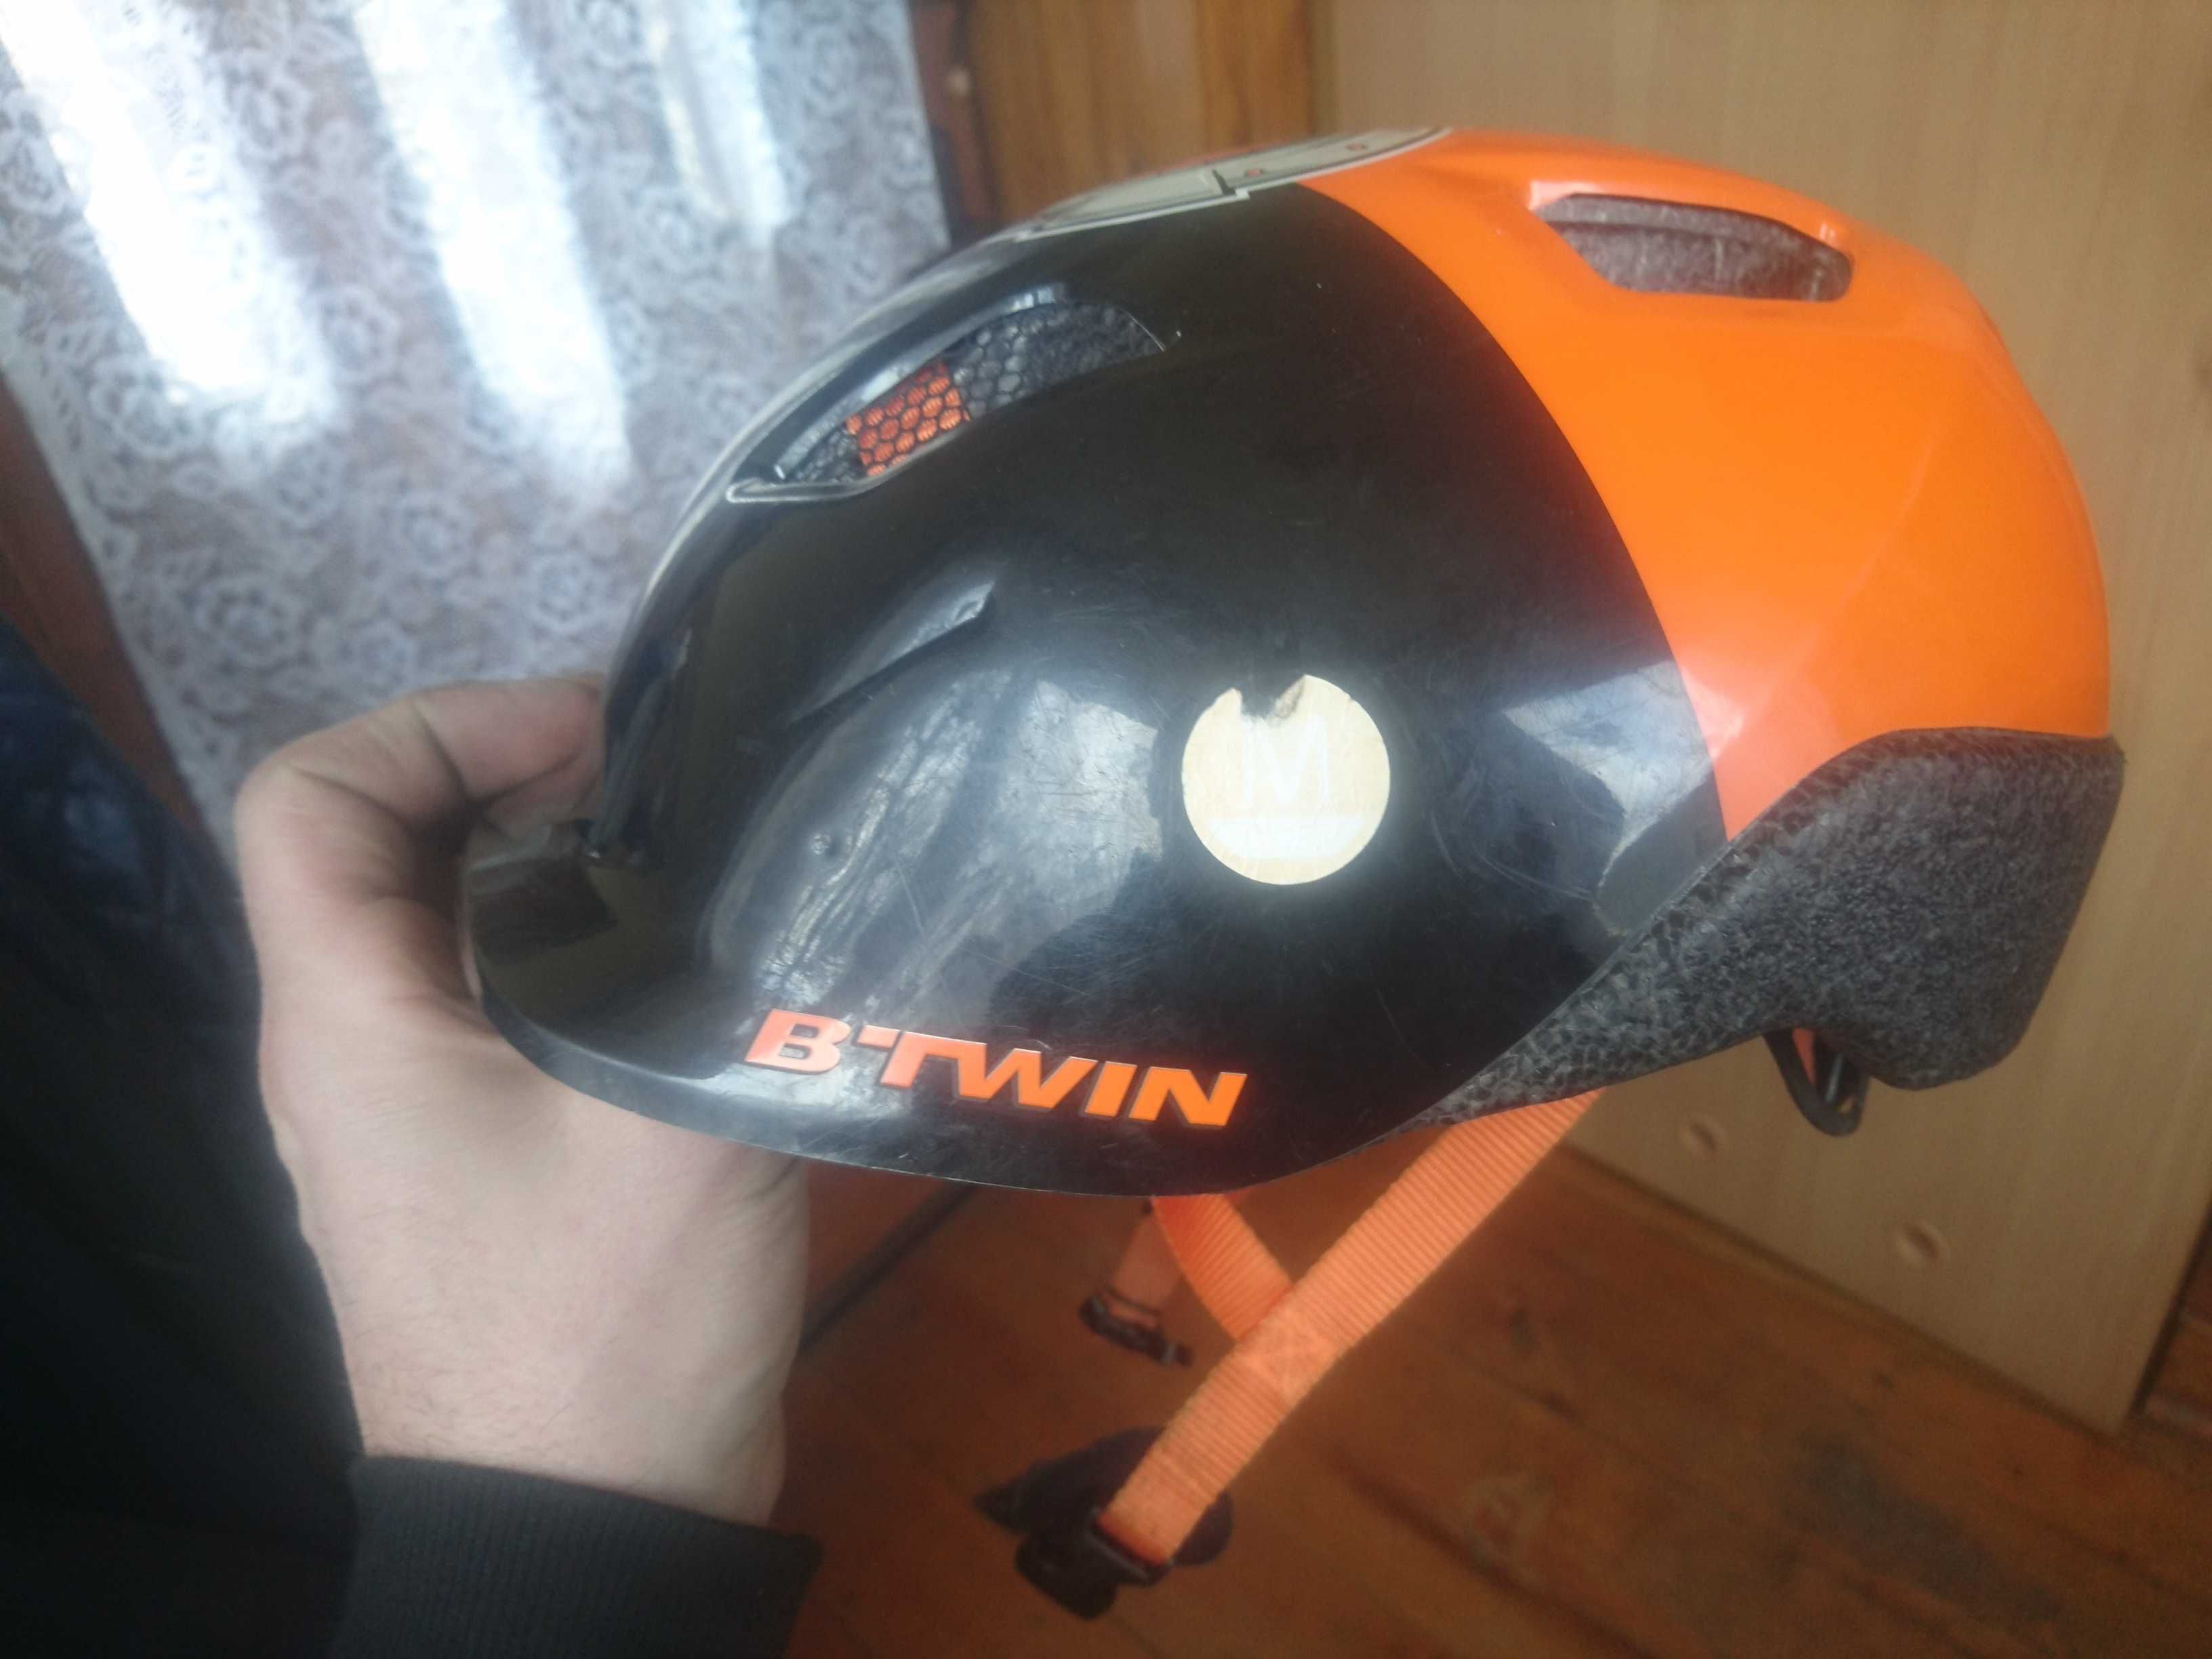 Kask rowerowy btwin kh520 robot